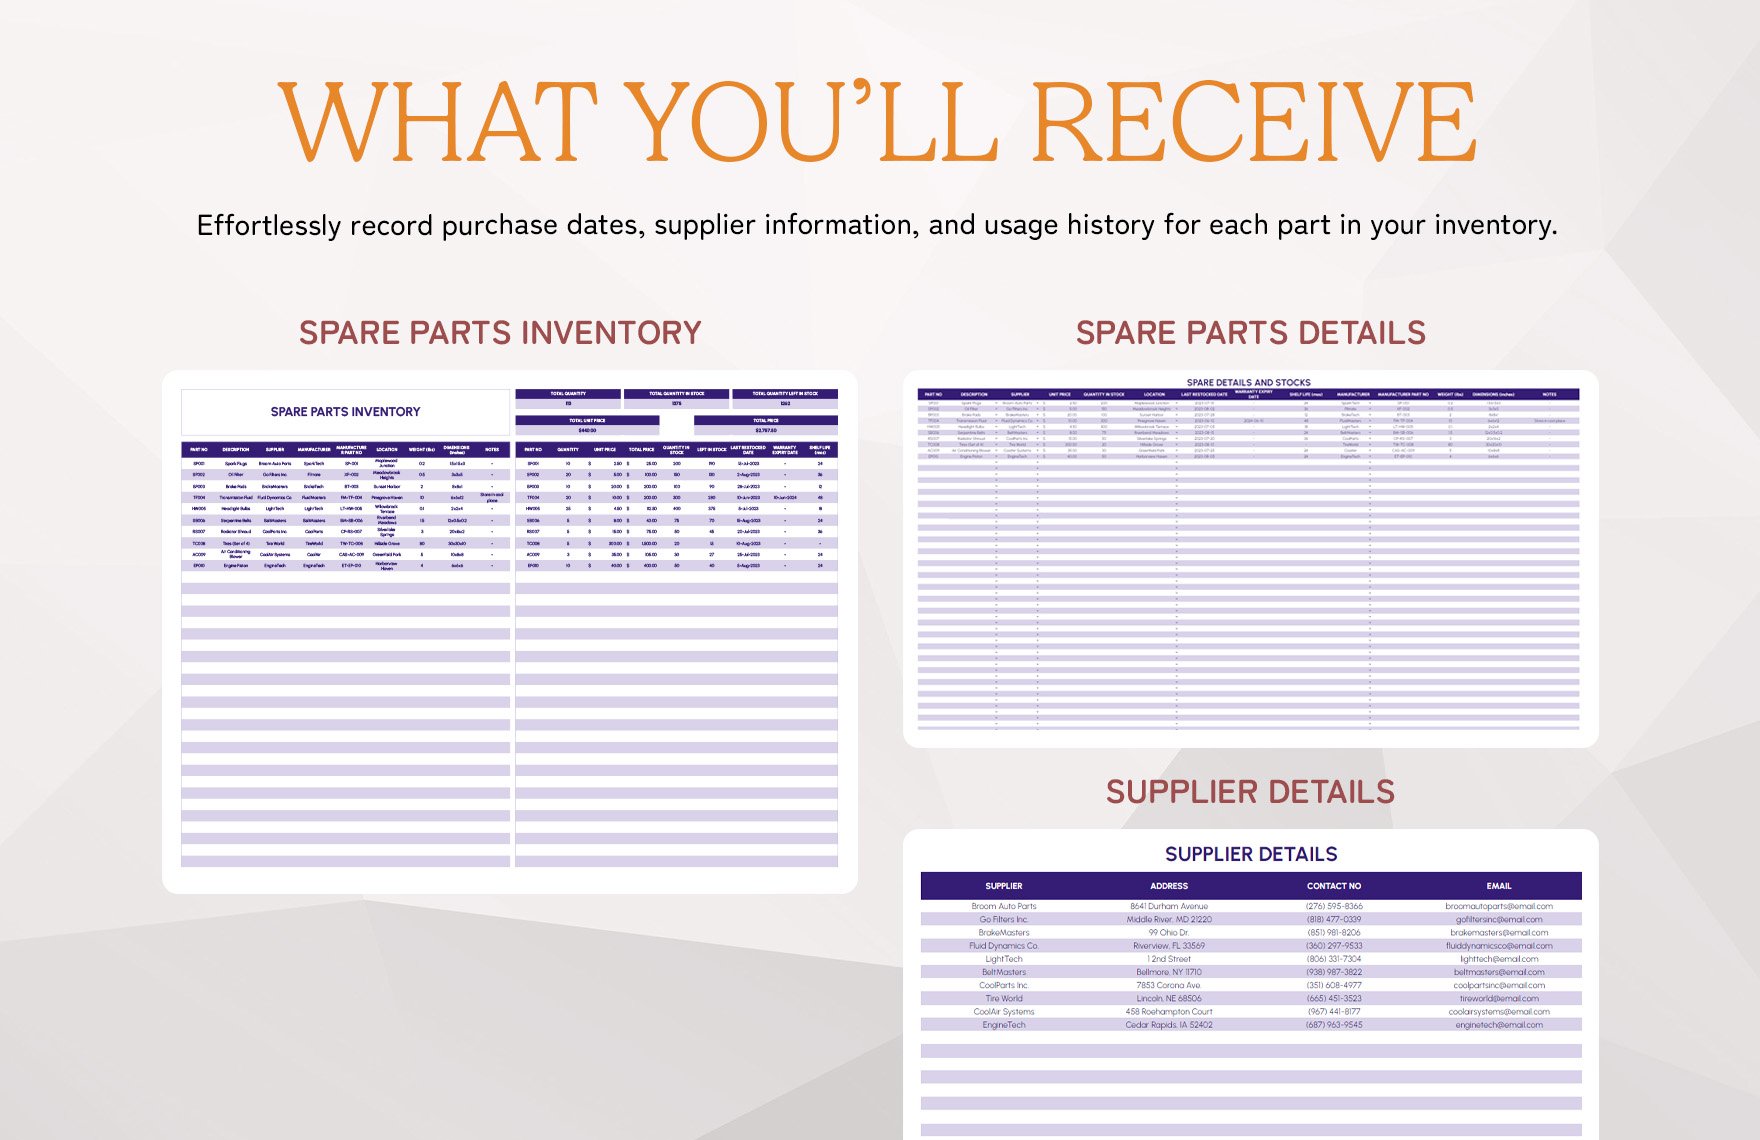 Spare Parts Inventory Template